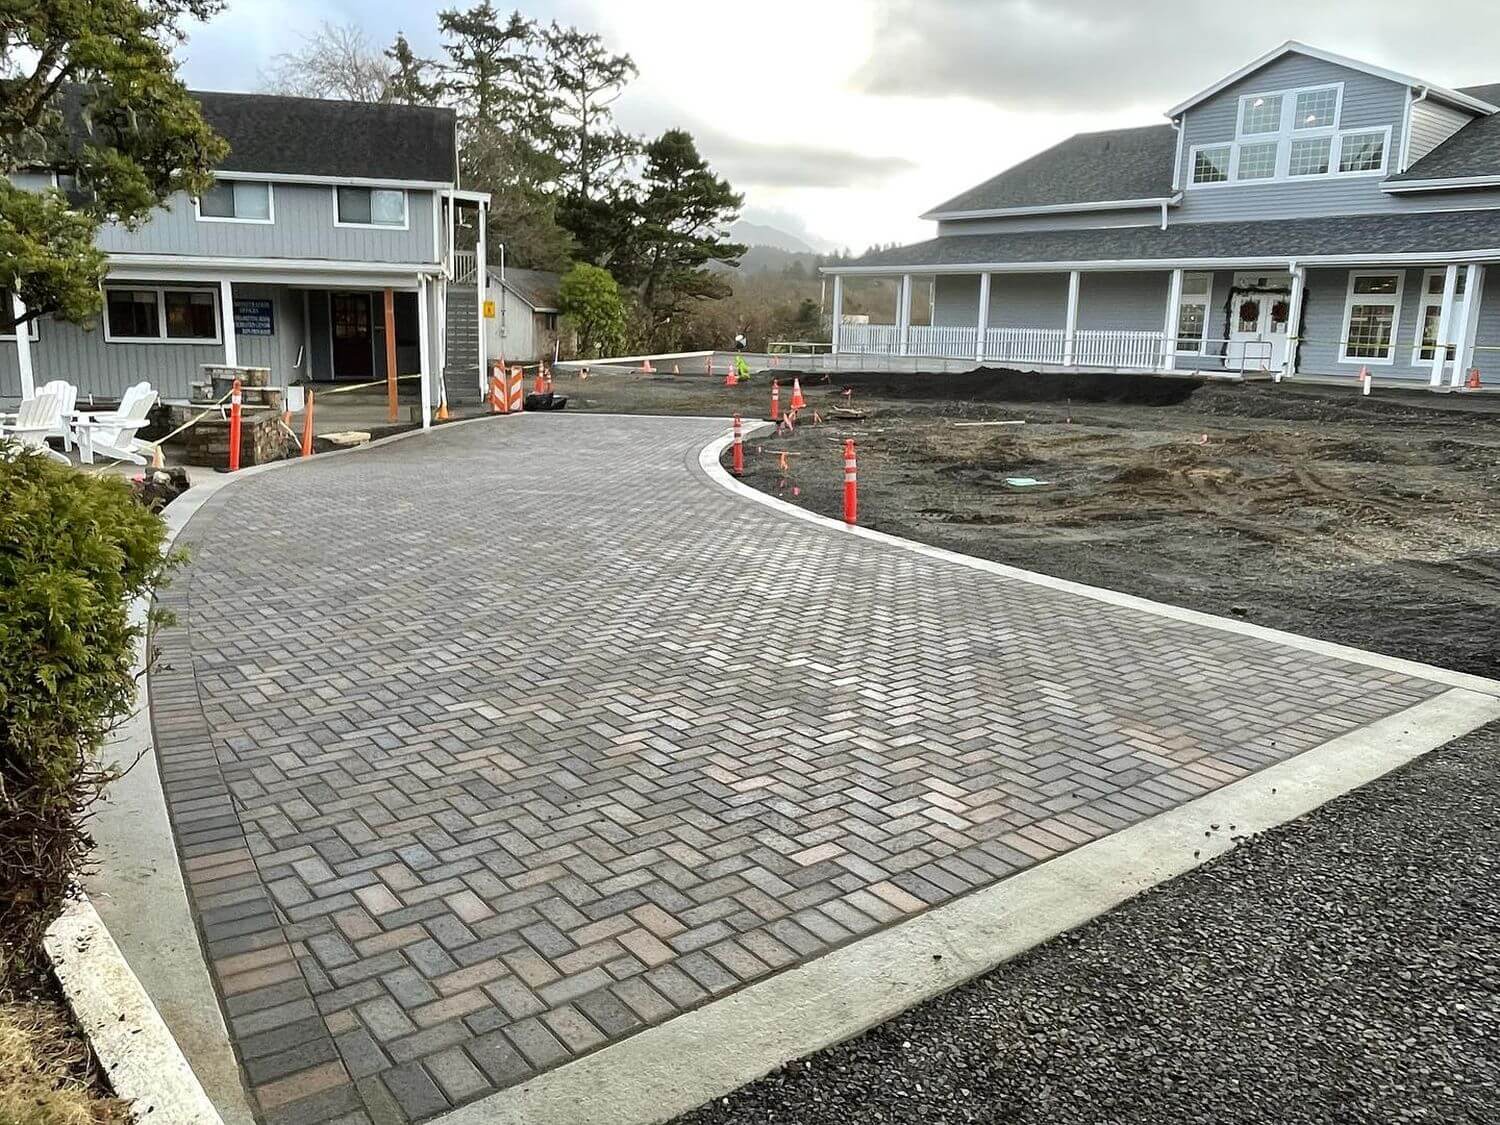 Will A Paver Driveway Increase My Home Value?